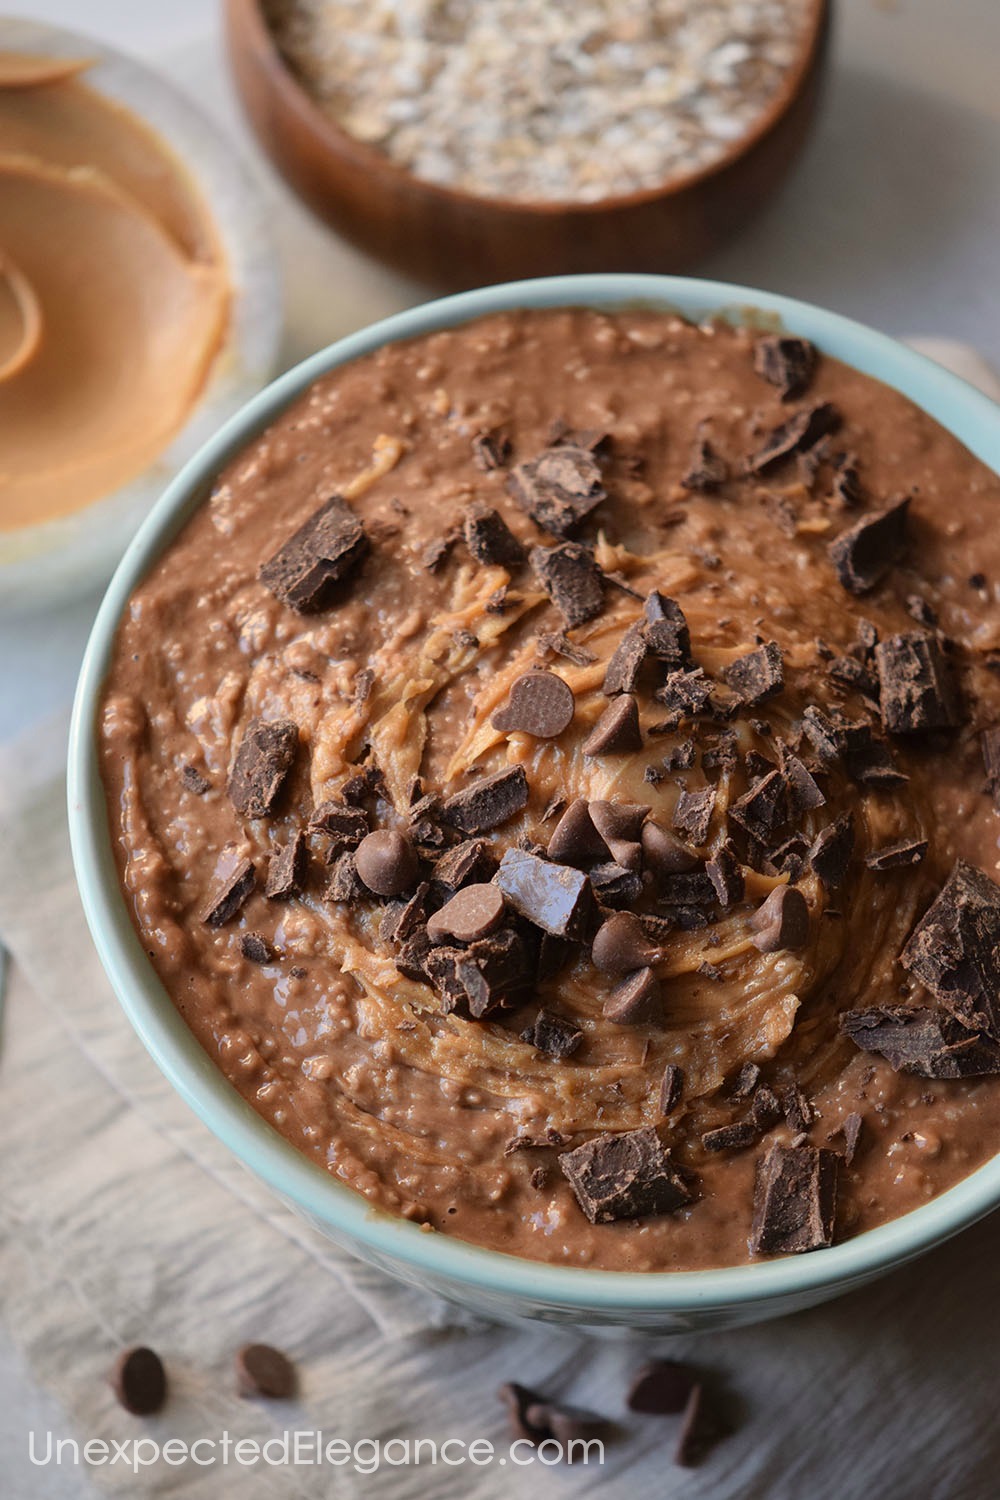 Peanut Butter Cup Oatmeal...does it get any better for breakfast?? Give this recipe a try for you next brunch or for a quick dessert!